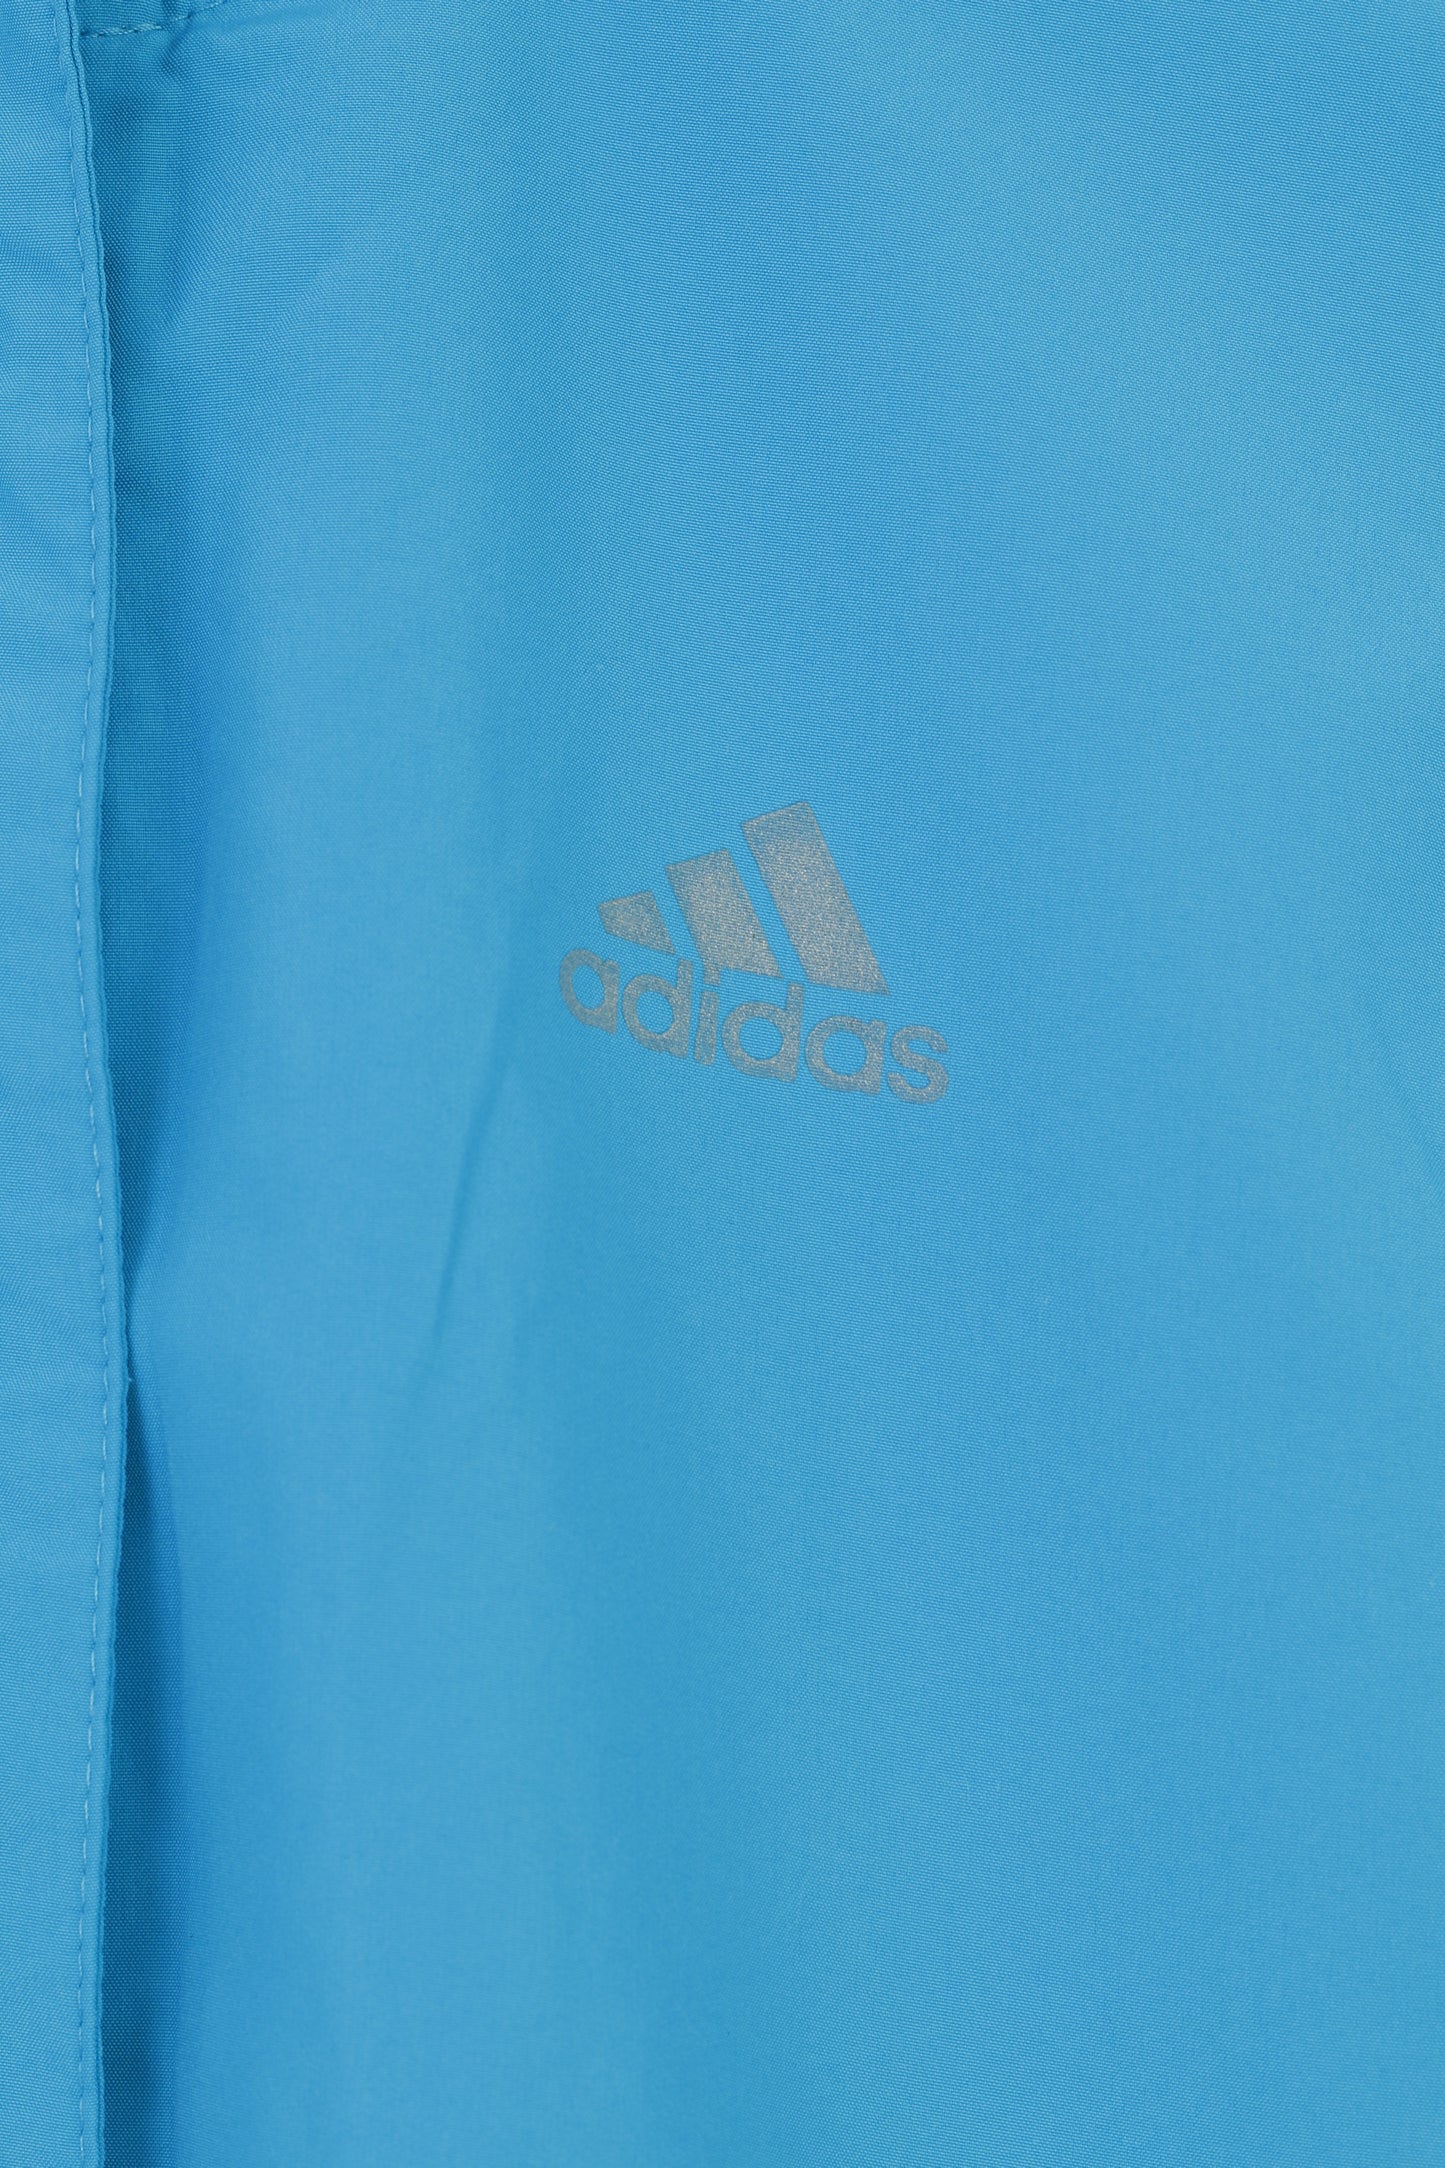 Adidas Women 40 M Jacket Blue Clima Proof Formotion Run Fitness Training Outwear Top